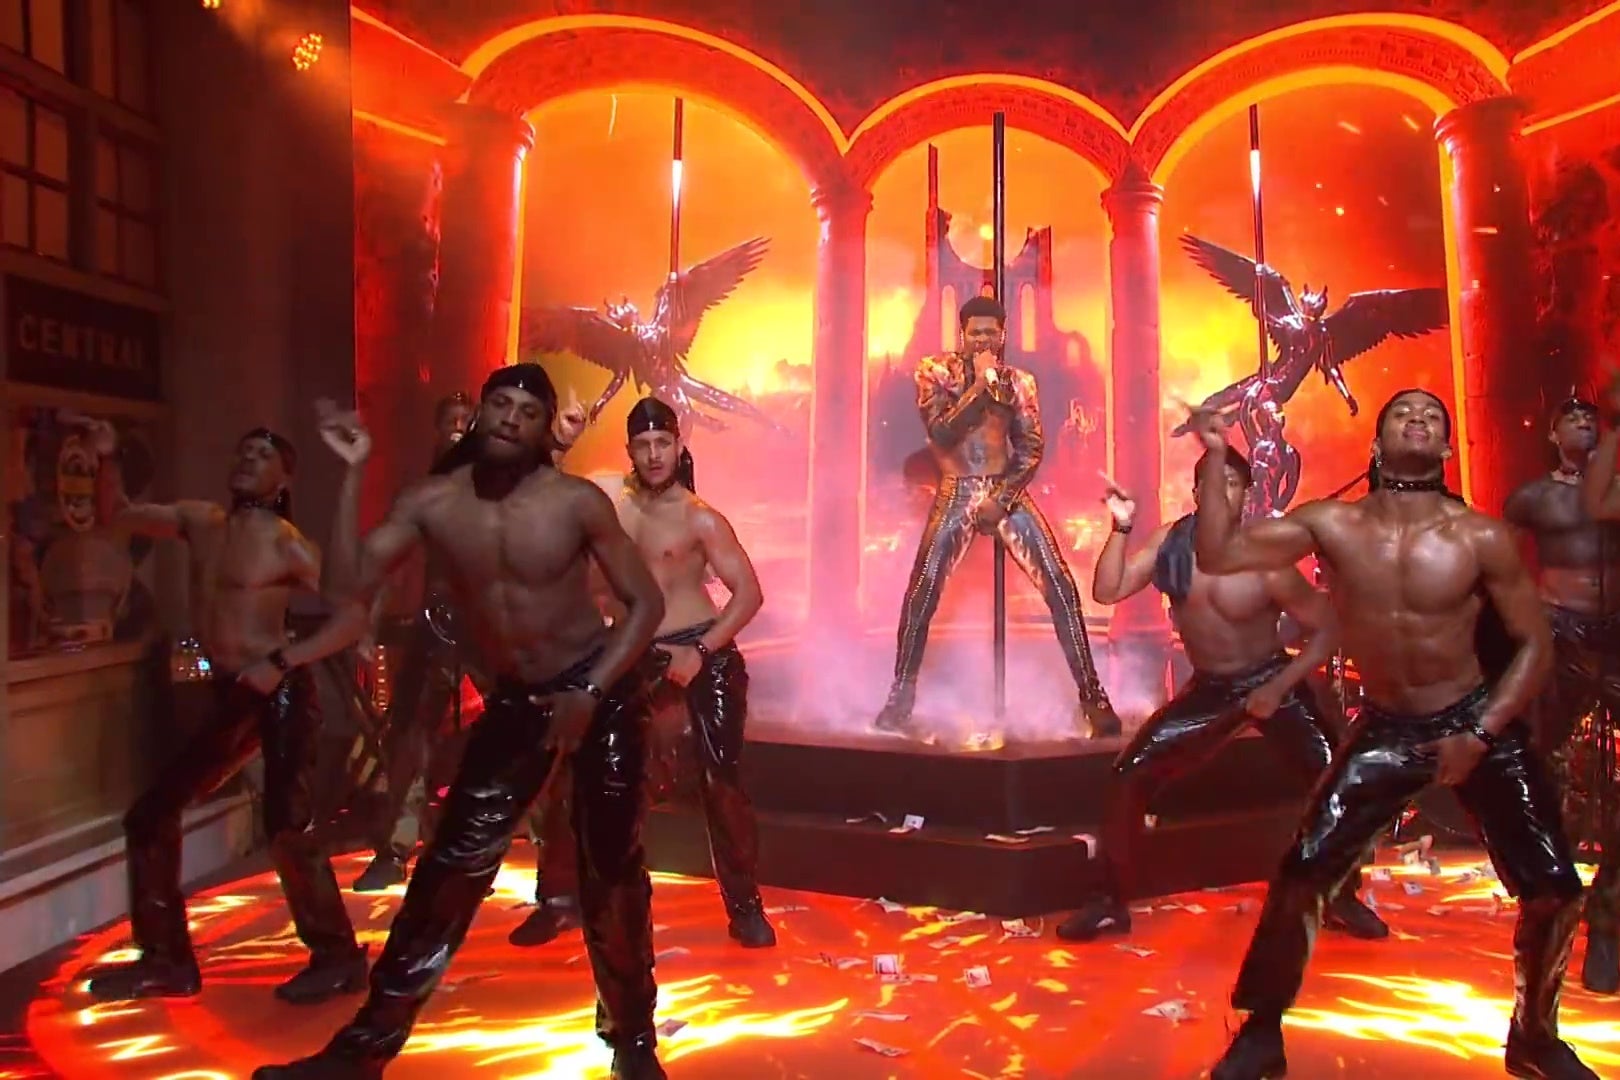 Lil Nas X performs on the SNL stage, which has been made up to look like hell. A line of shirtless black men wearing shiny black pants dance around him.